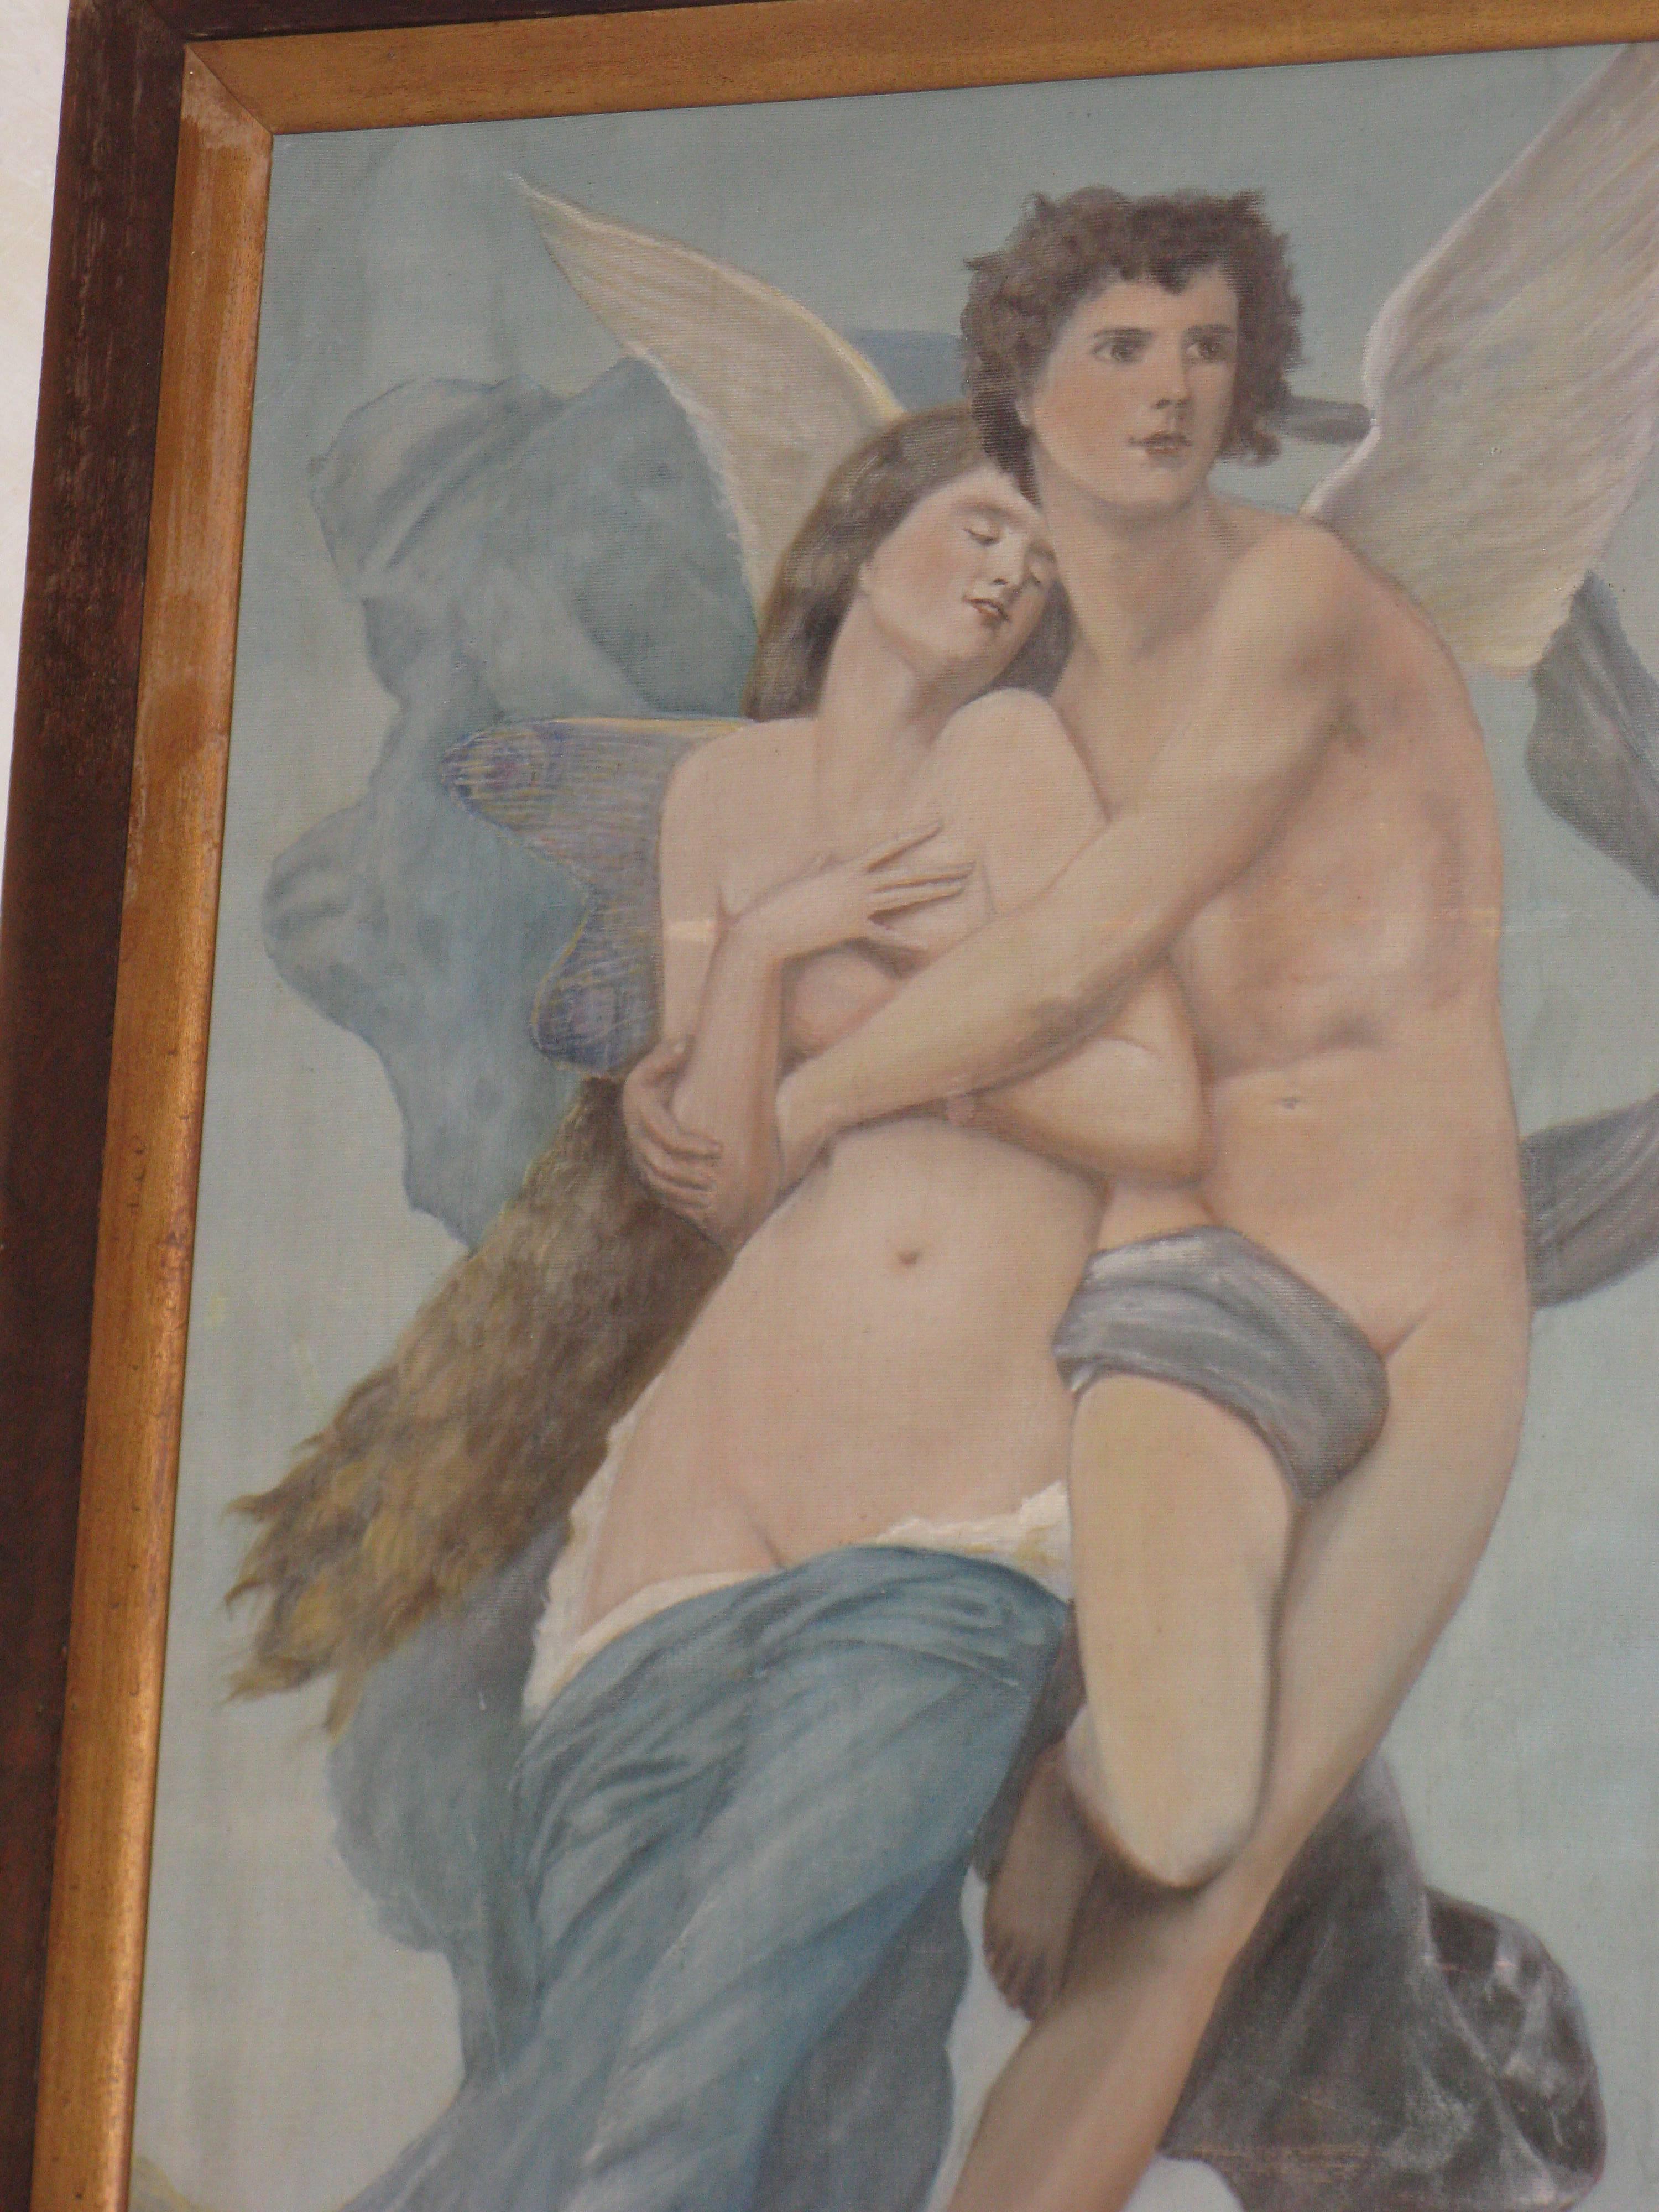 Exquisite antique oil painting depicting Cupid and Psyche ascending to the heavens, one of the greatest love stories in classical literature. A wonderful interpretive painting in oil by a highly skilled unknown artist after the original by William